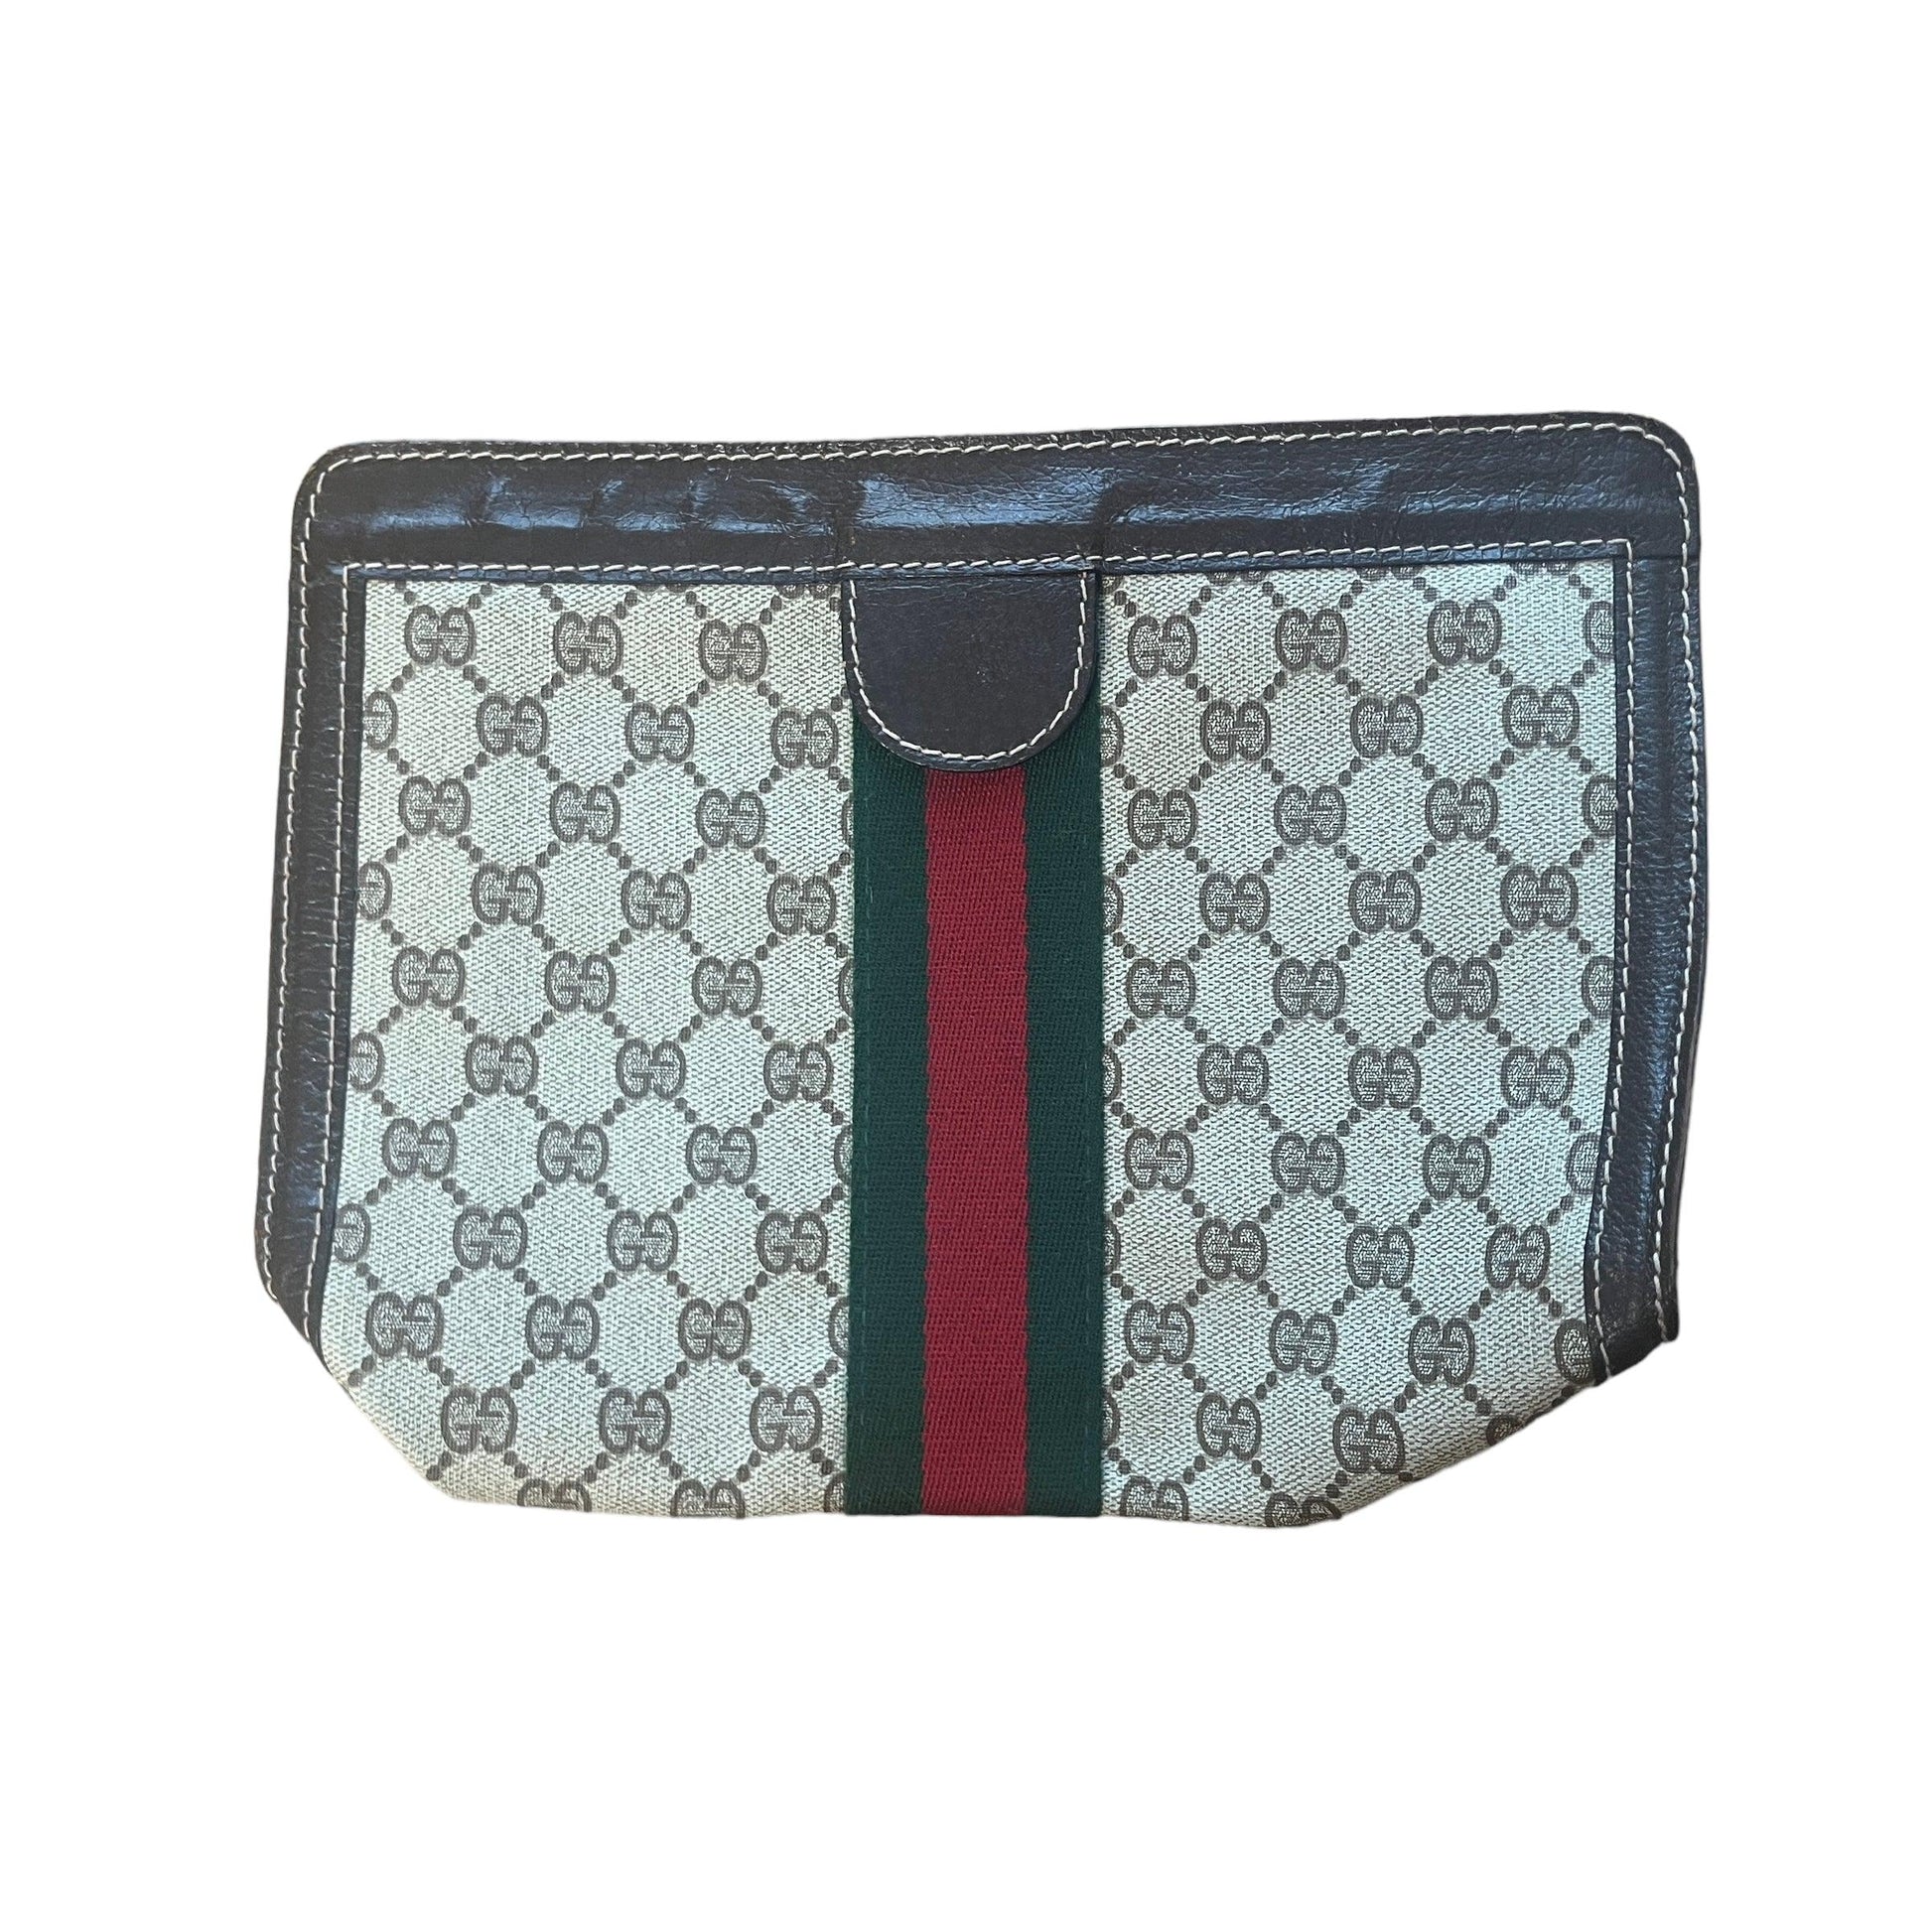 Gucci, Bags, Authentic Vintage Runway Gucci Bag Early 99s